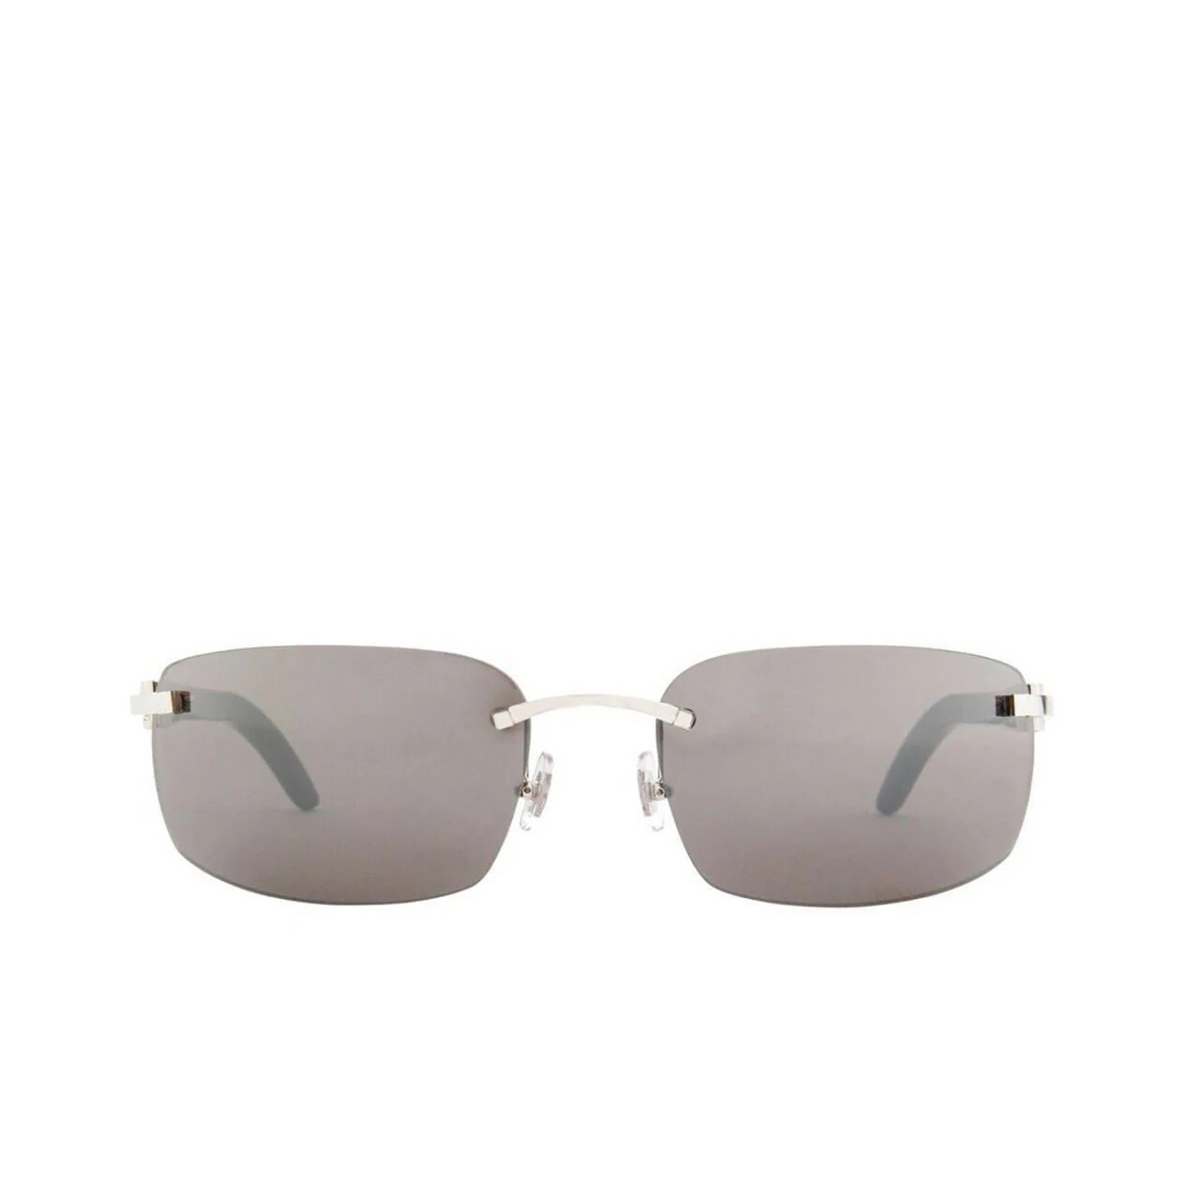 Cartier CT0046S Sunglasses 001 Grey - front view